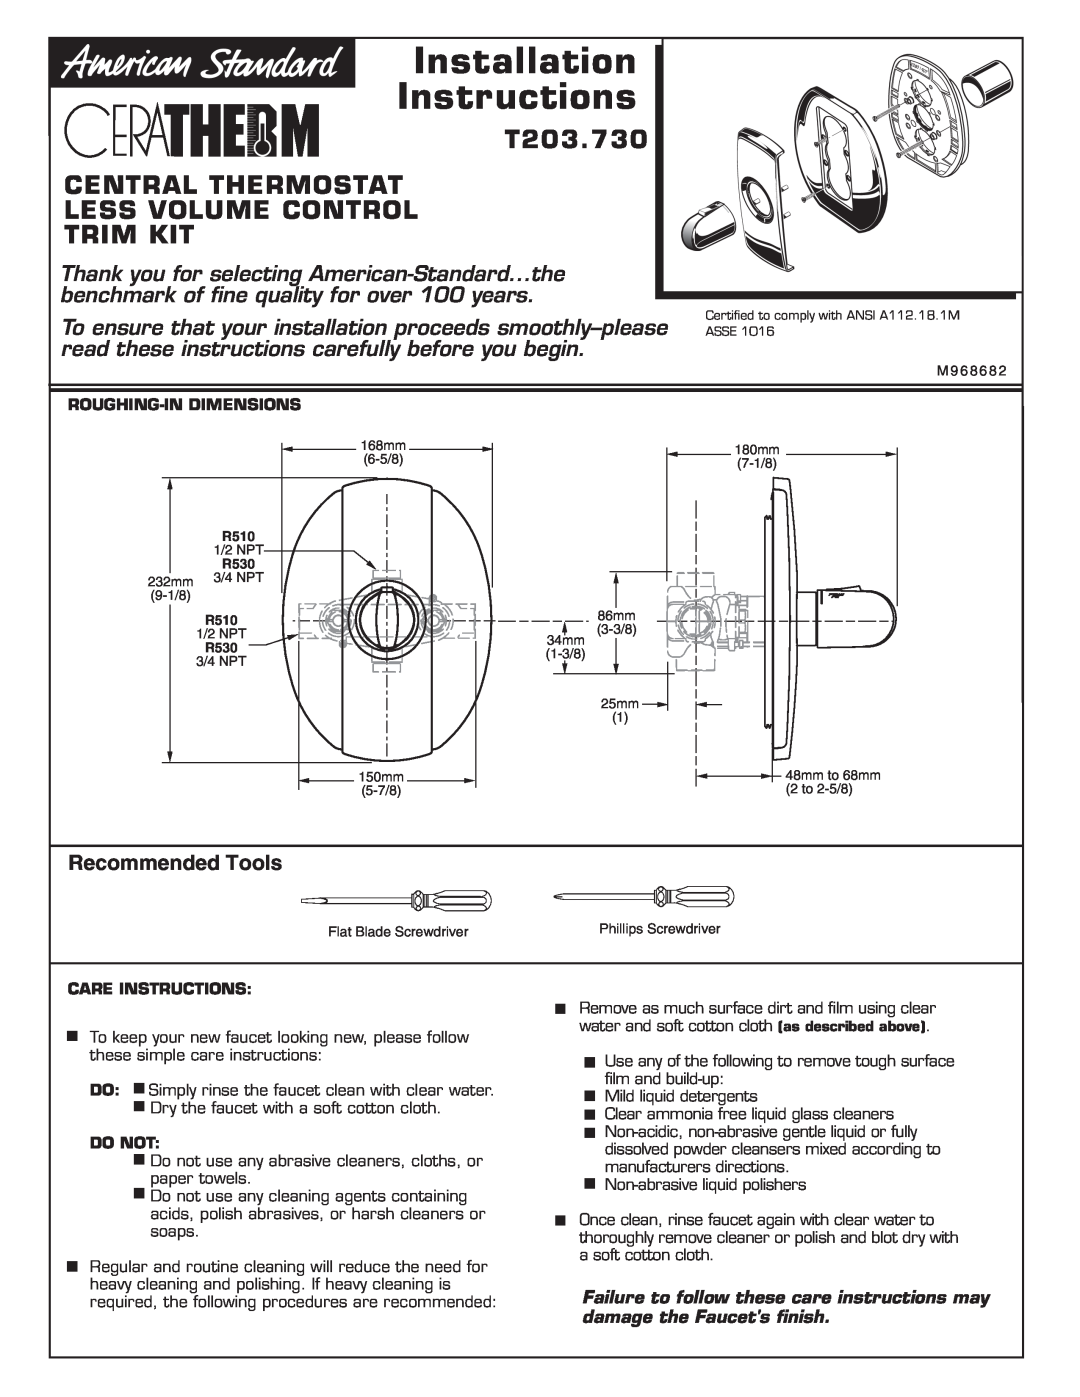 American Standard installation instructions T203.730 CENTRAL THERMOSTAT LESS VOLUME CONTROL TRIM KIT, Recommended Tools 